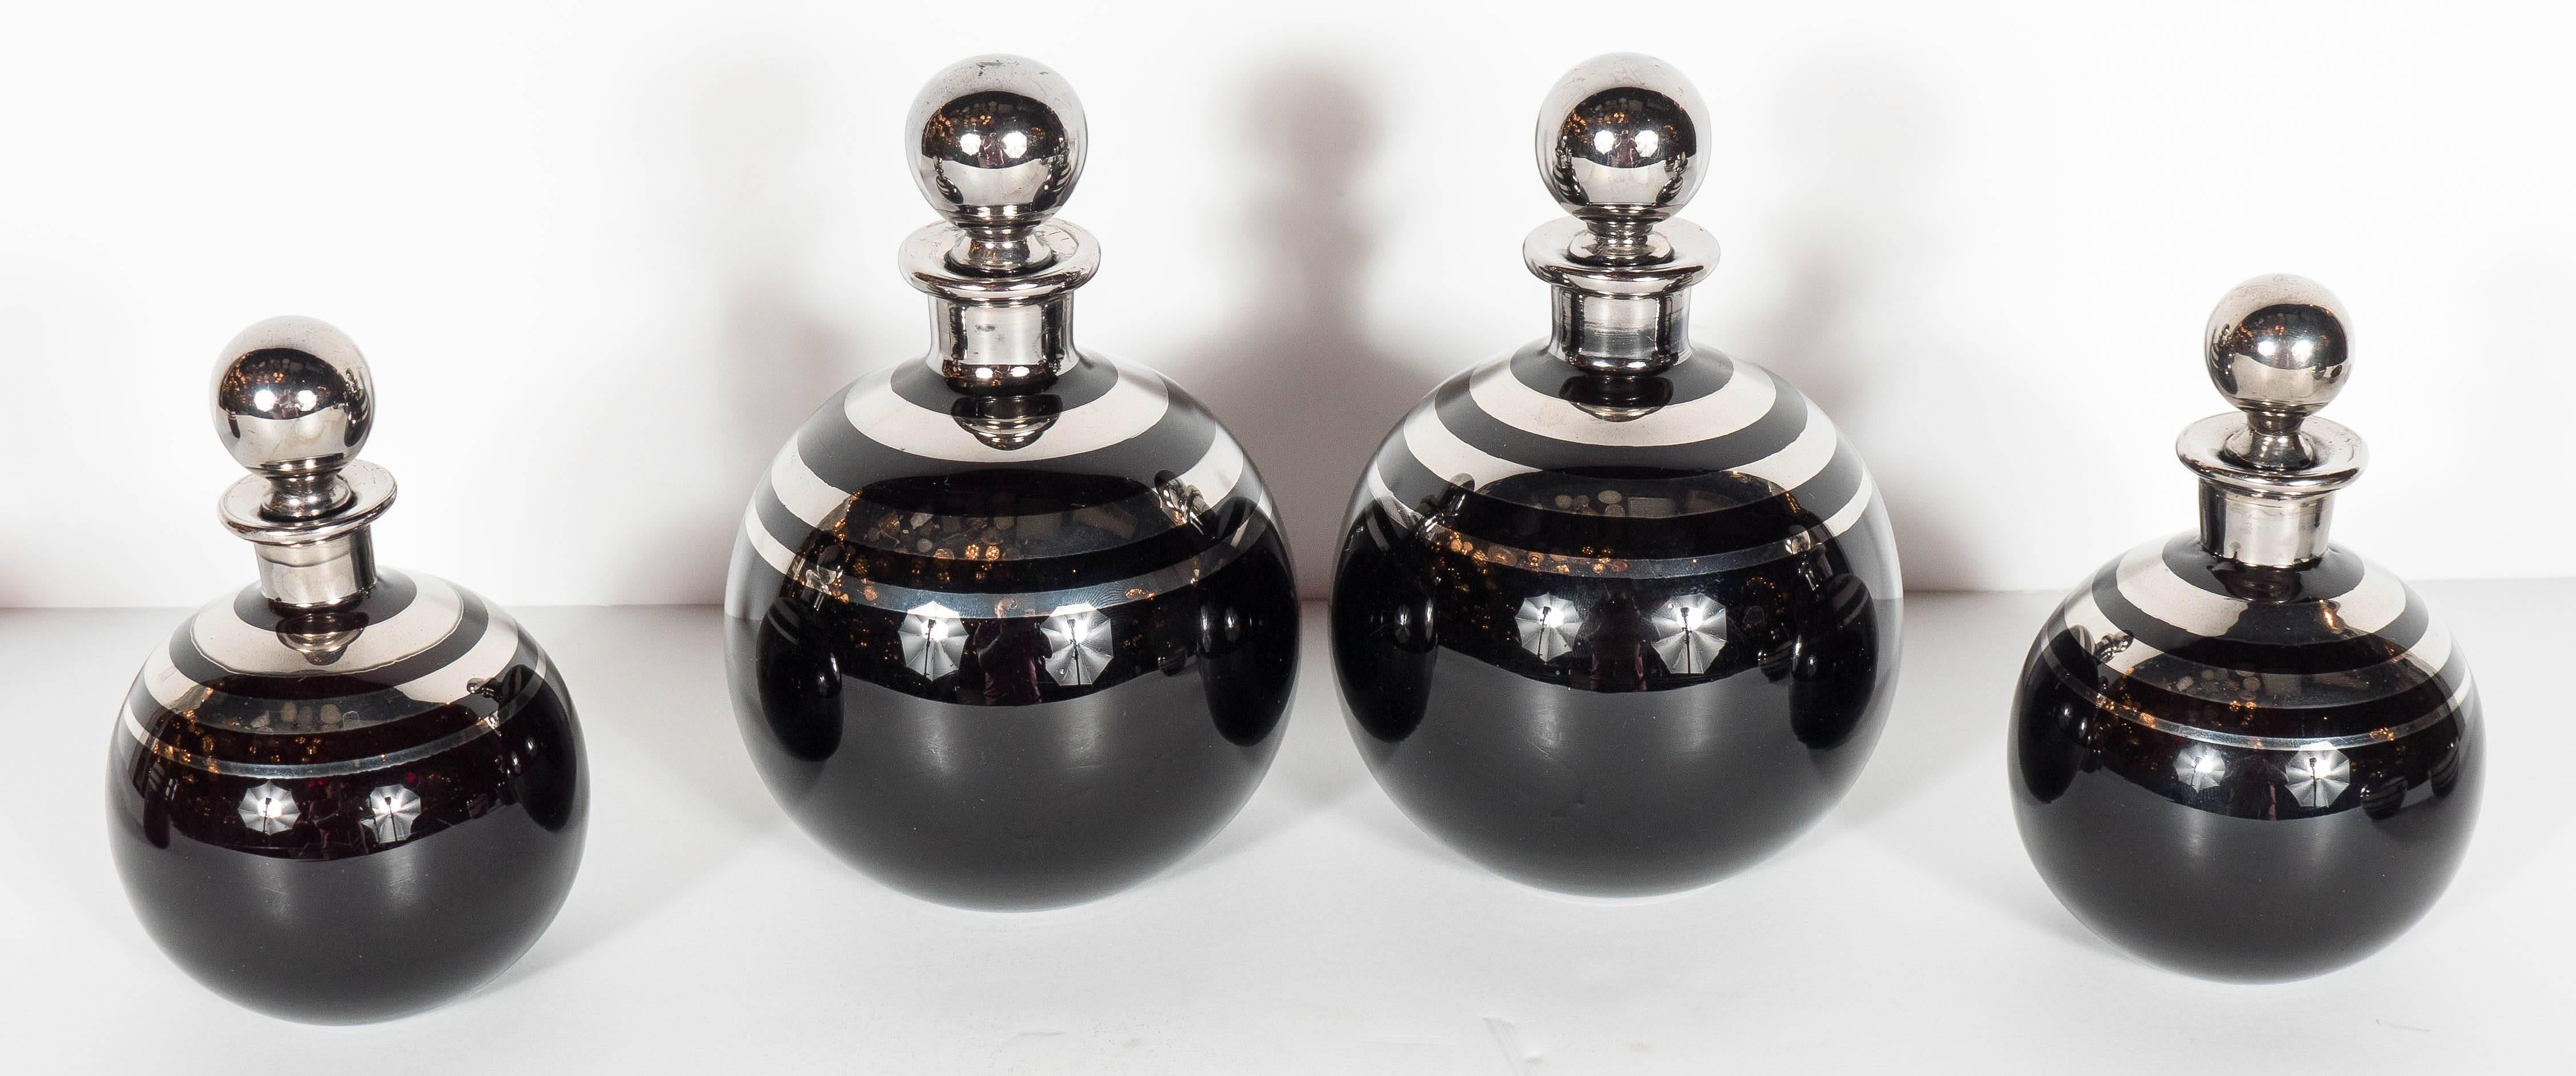 This incredible and complete vanity set is made of dark amethyst glass with concentric banded sterling overlay. It features four perfume holders, a covered box and dish both perfect for jewelry, it also has a cup as well. These are all in incredible